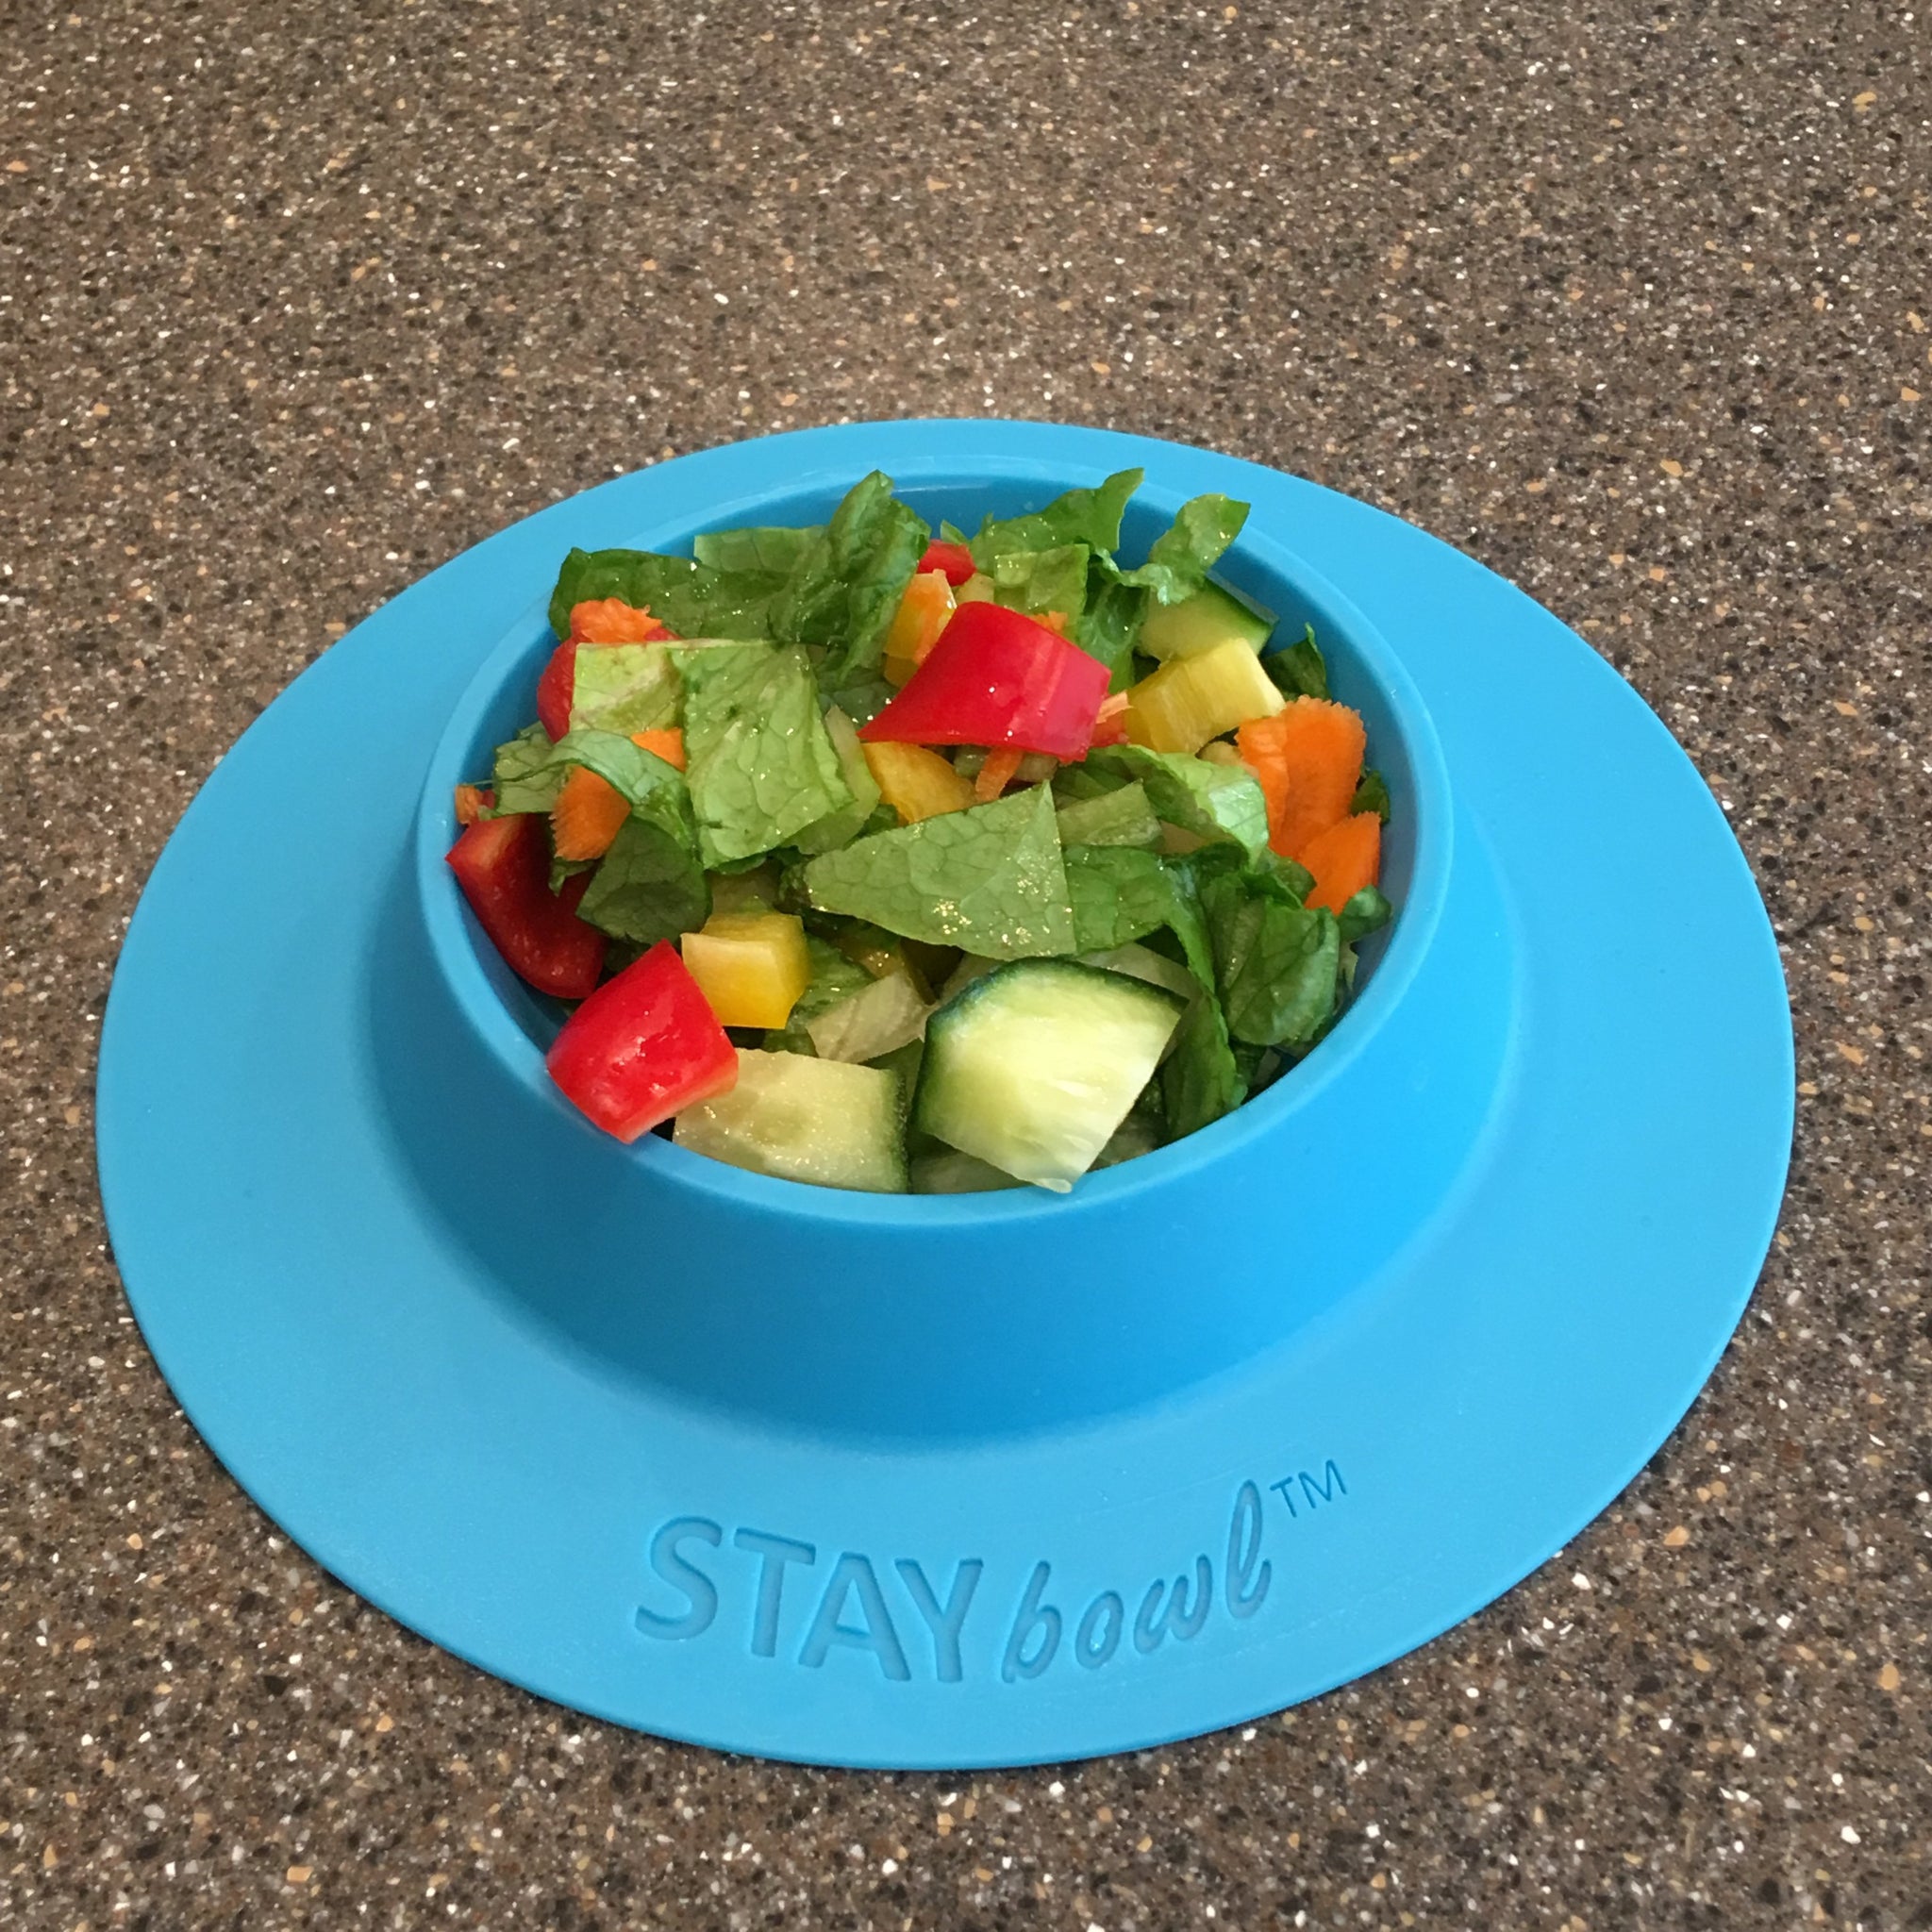 STAYbowlⓇ NO-SLIP/NO-TIP Food and Water Bowl for Cats (3/4 CUP